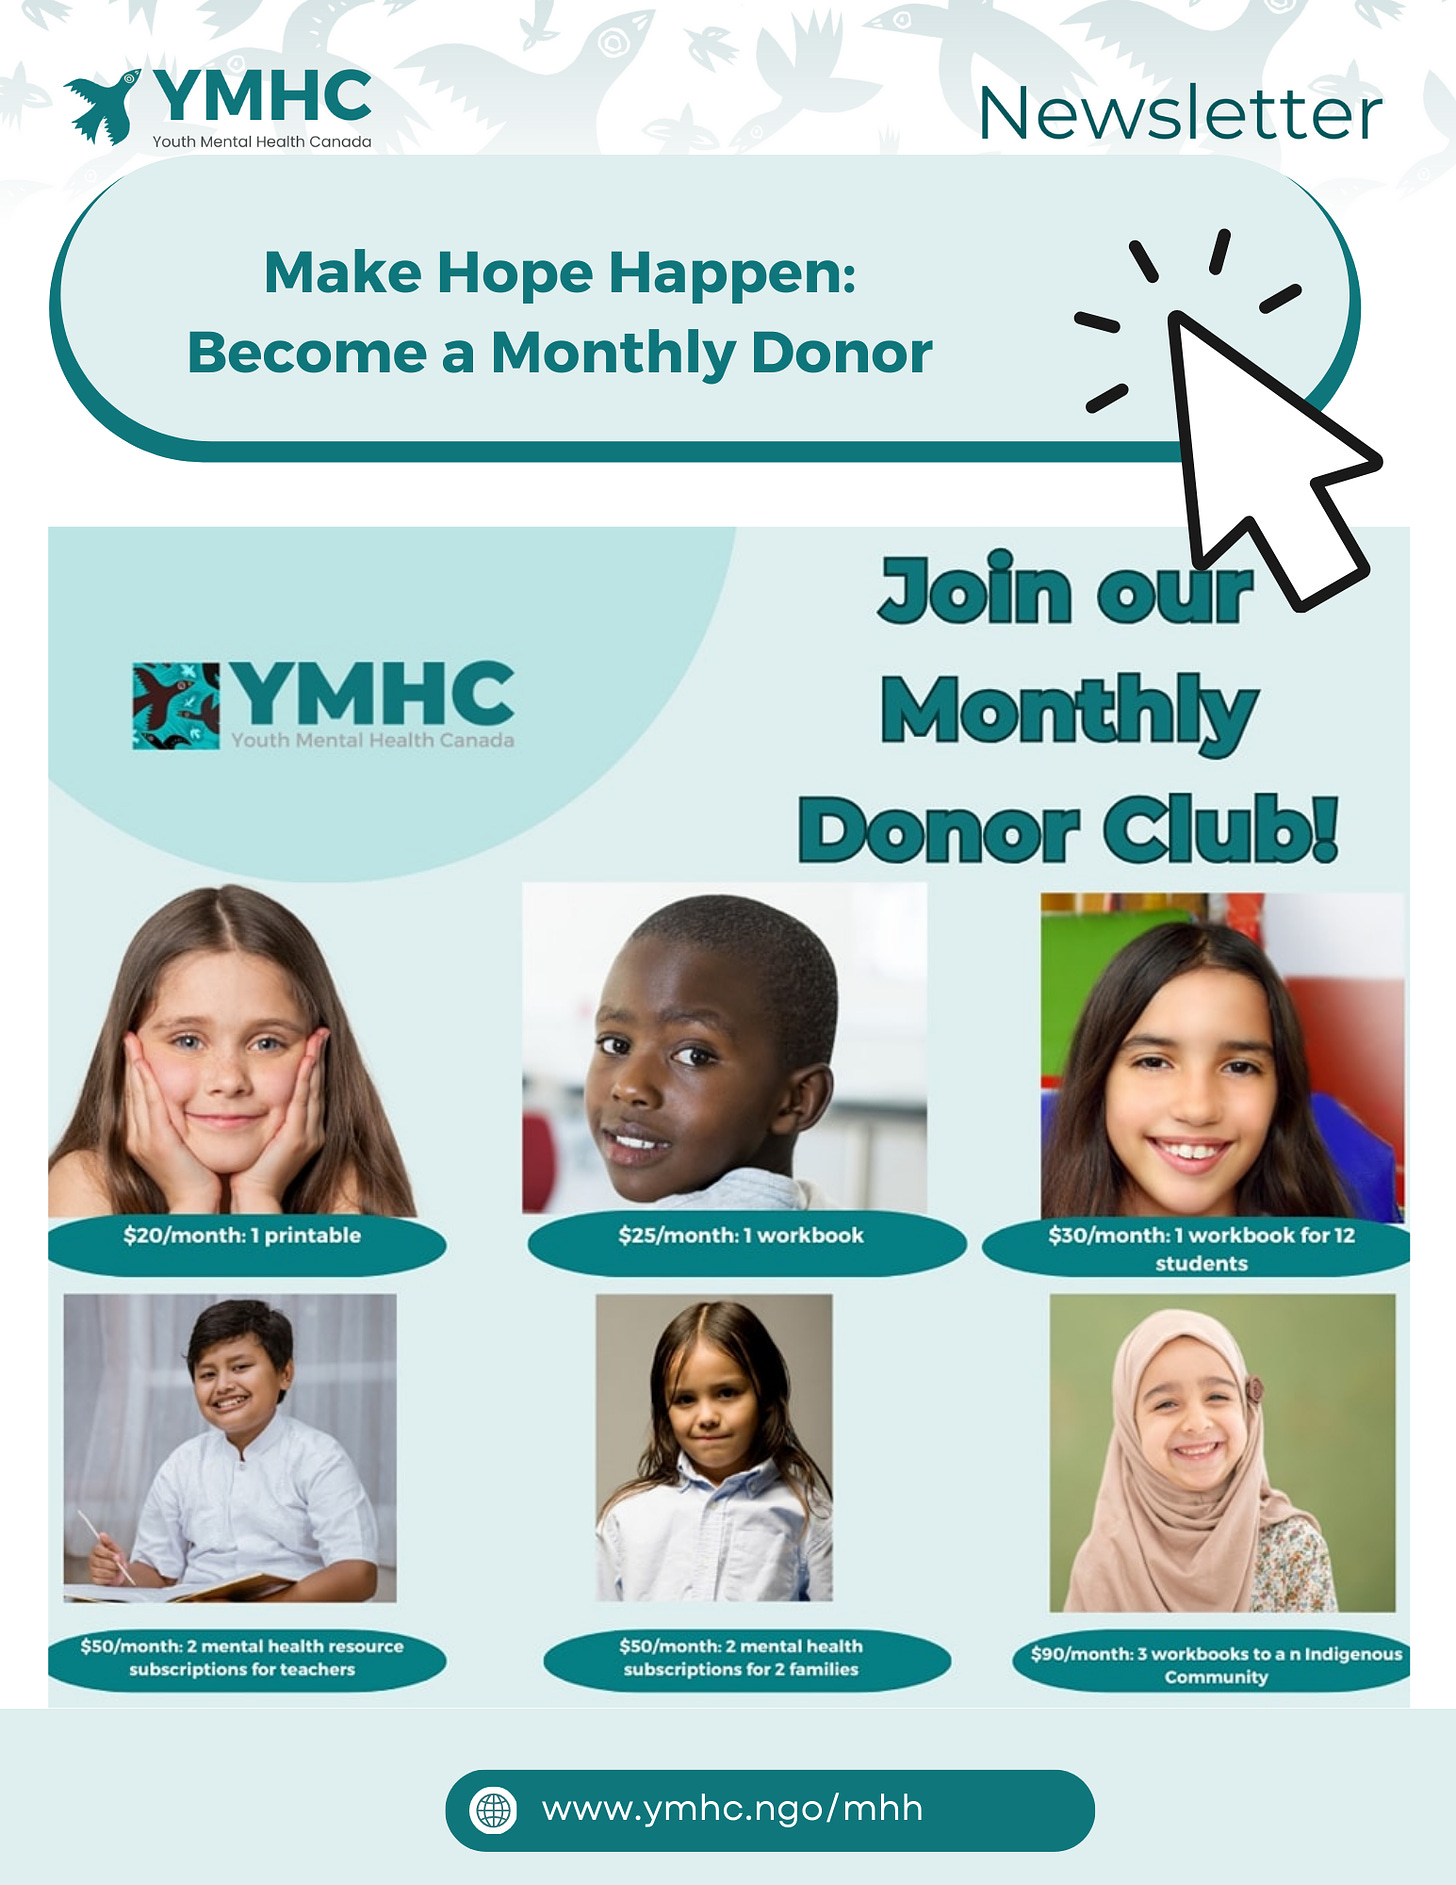 Make Hope Happen:  Become a Monthly Donor